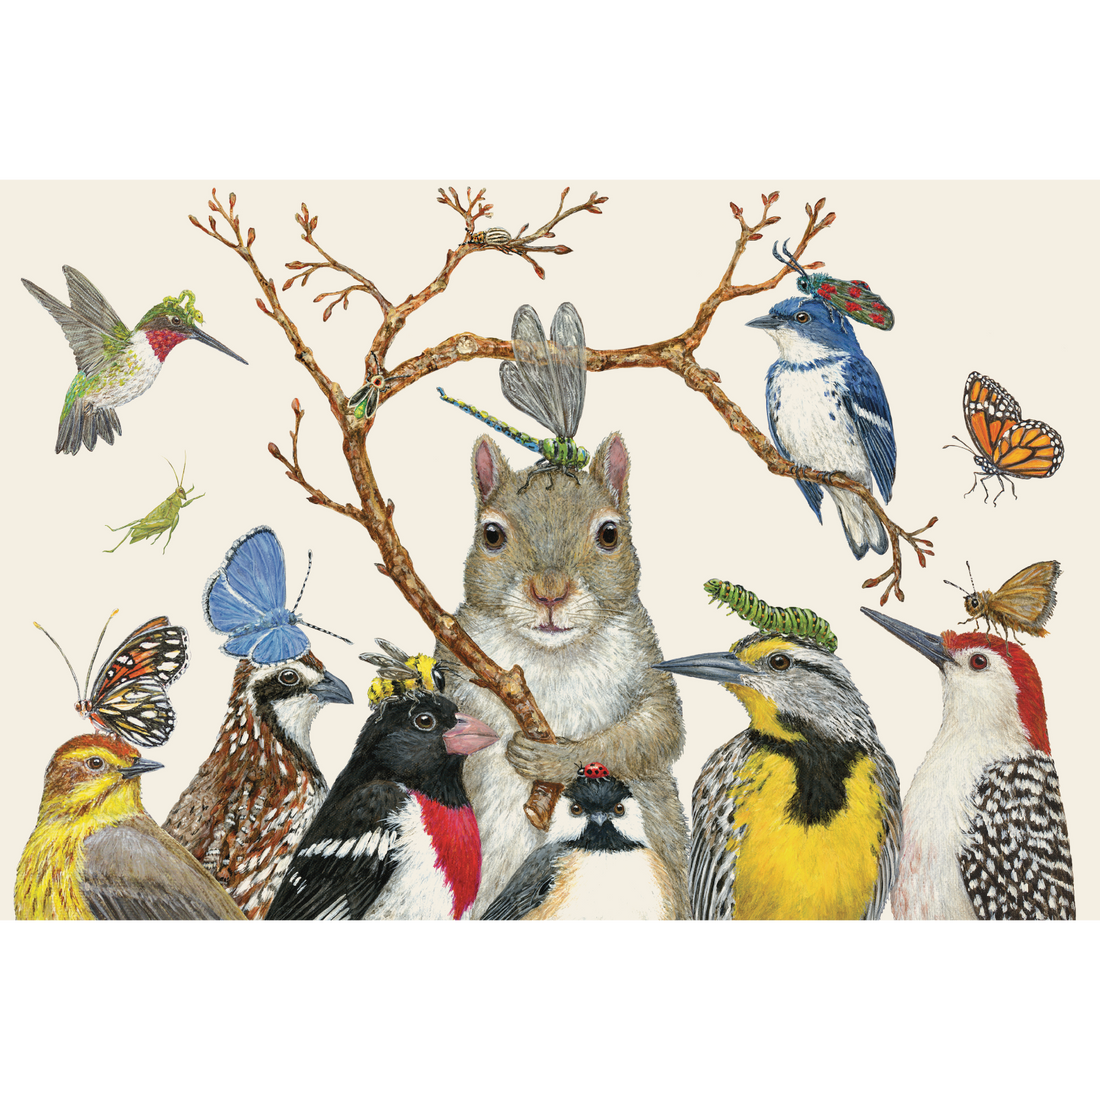 A charming illustration of a squirrel holding a curved twig, surrounded by colorful bird friends, each with a cute bug on its head such as butterflies, dragonflies, a bee and a caterpillar, on a white background.